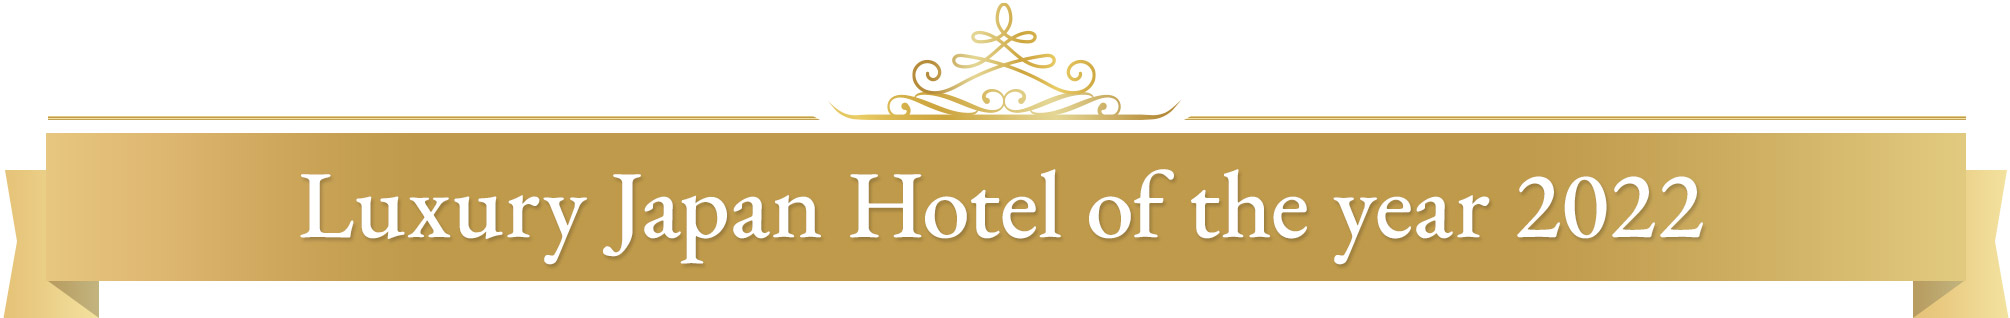 Luxury Japan Hotel of the year 2022